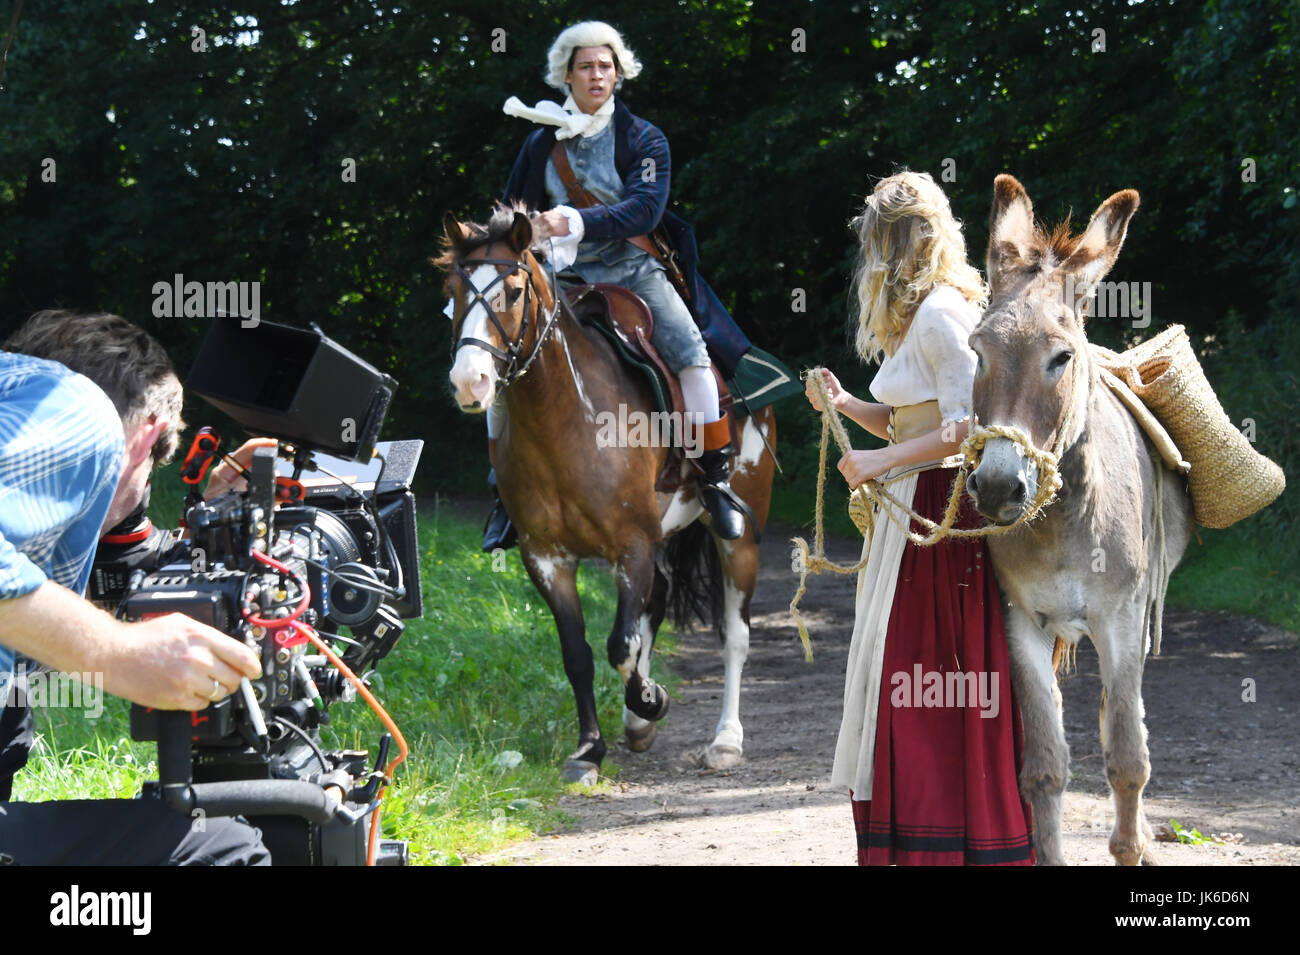 Wiesenburg, Germany. 20th July, 2017. The actors Emilio Sakraya and Jeanne Goursaud can be seen during the shooting of the fairytale movie 'Der Schweinehirt' (lit. swineherd) in Wiesenburg, Germany, 20 July 2017. The movie wil be aired during the ARD-fairytale series 'Sechs auf einen Streich' (lit. six in a row) on Christmas. Photo: Bernd Settnik/dpa-Zentralbild/dpa/Alamy Live News Stock Photo